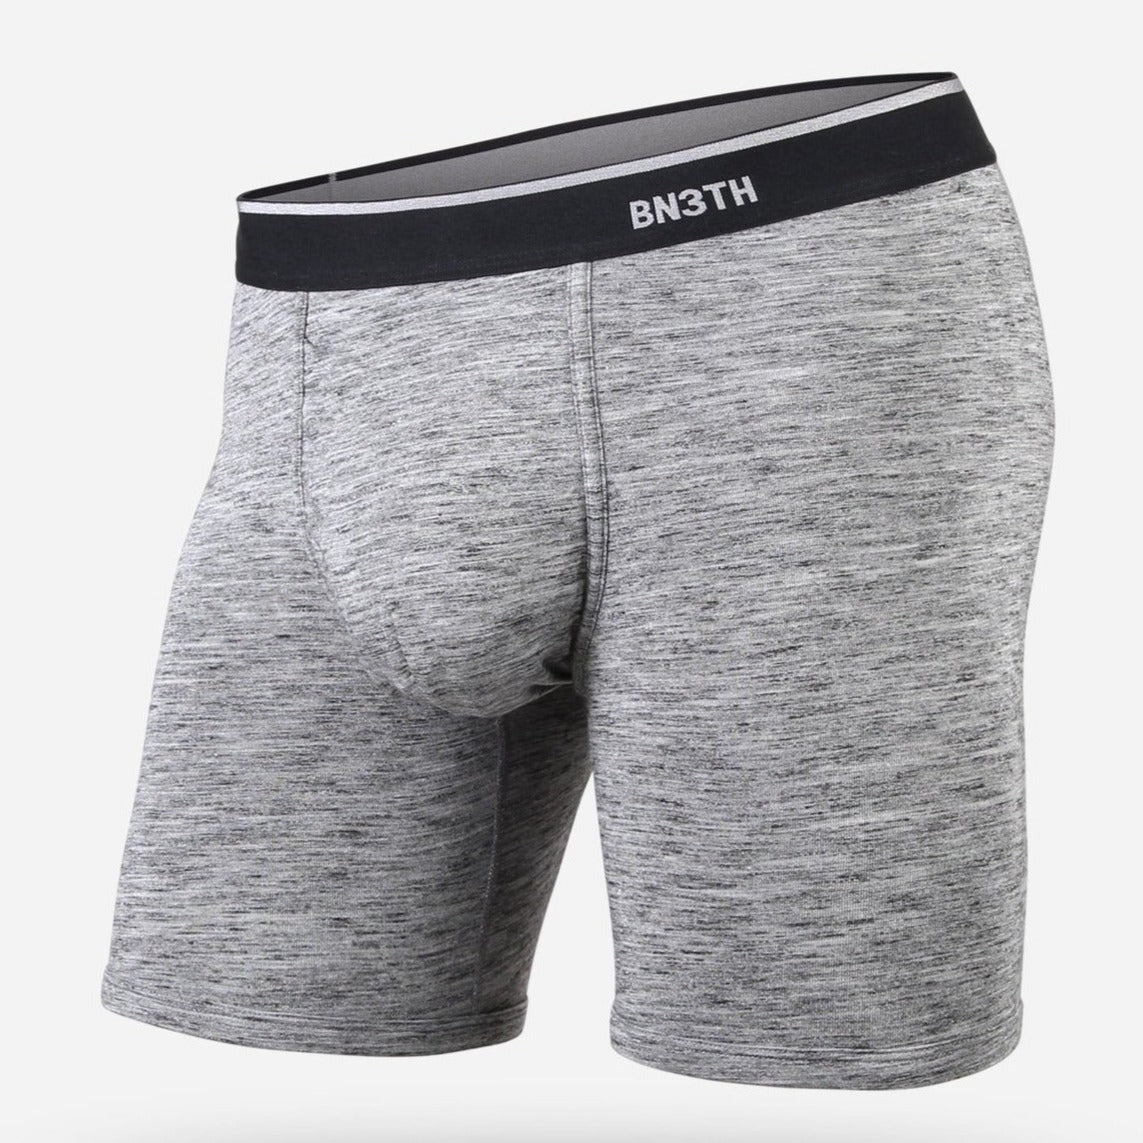 BN3TH - CLASSIC BOXER BRIEF SOLID IN CHARCOAL HEATHER